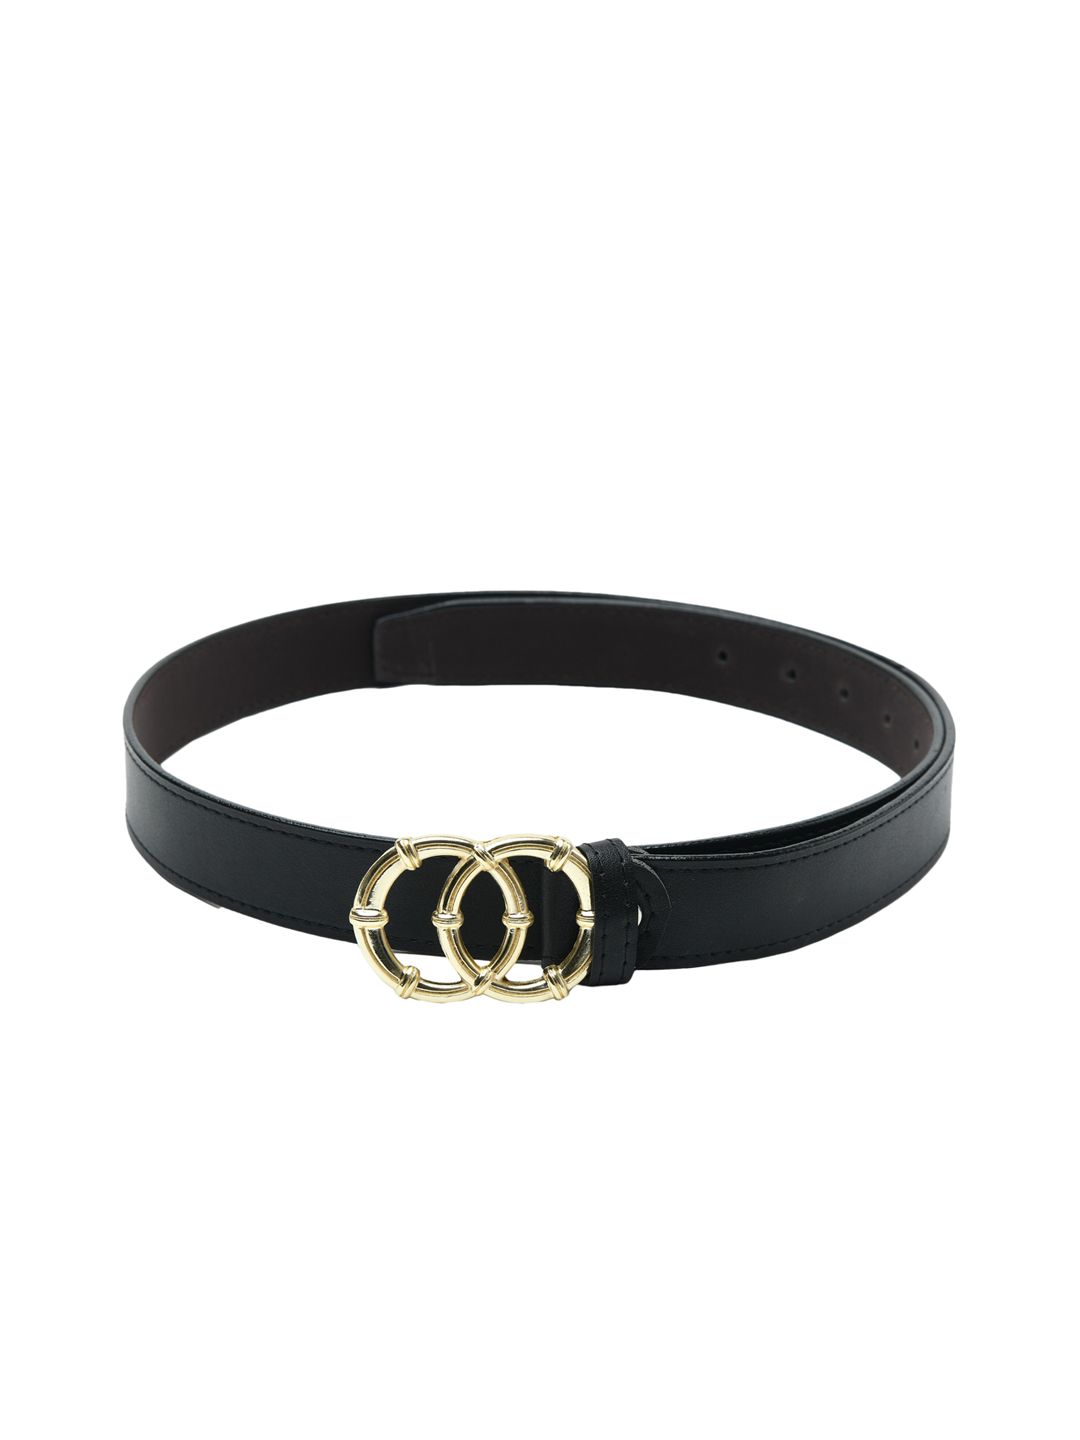 WINSOME DEAL Women Black & Gold-Toned Solid Artificial Leather Belt Price in India